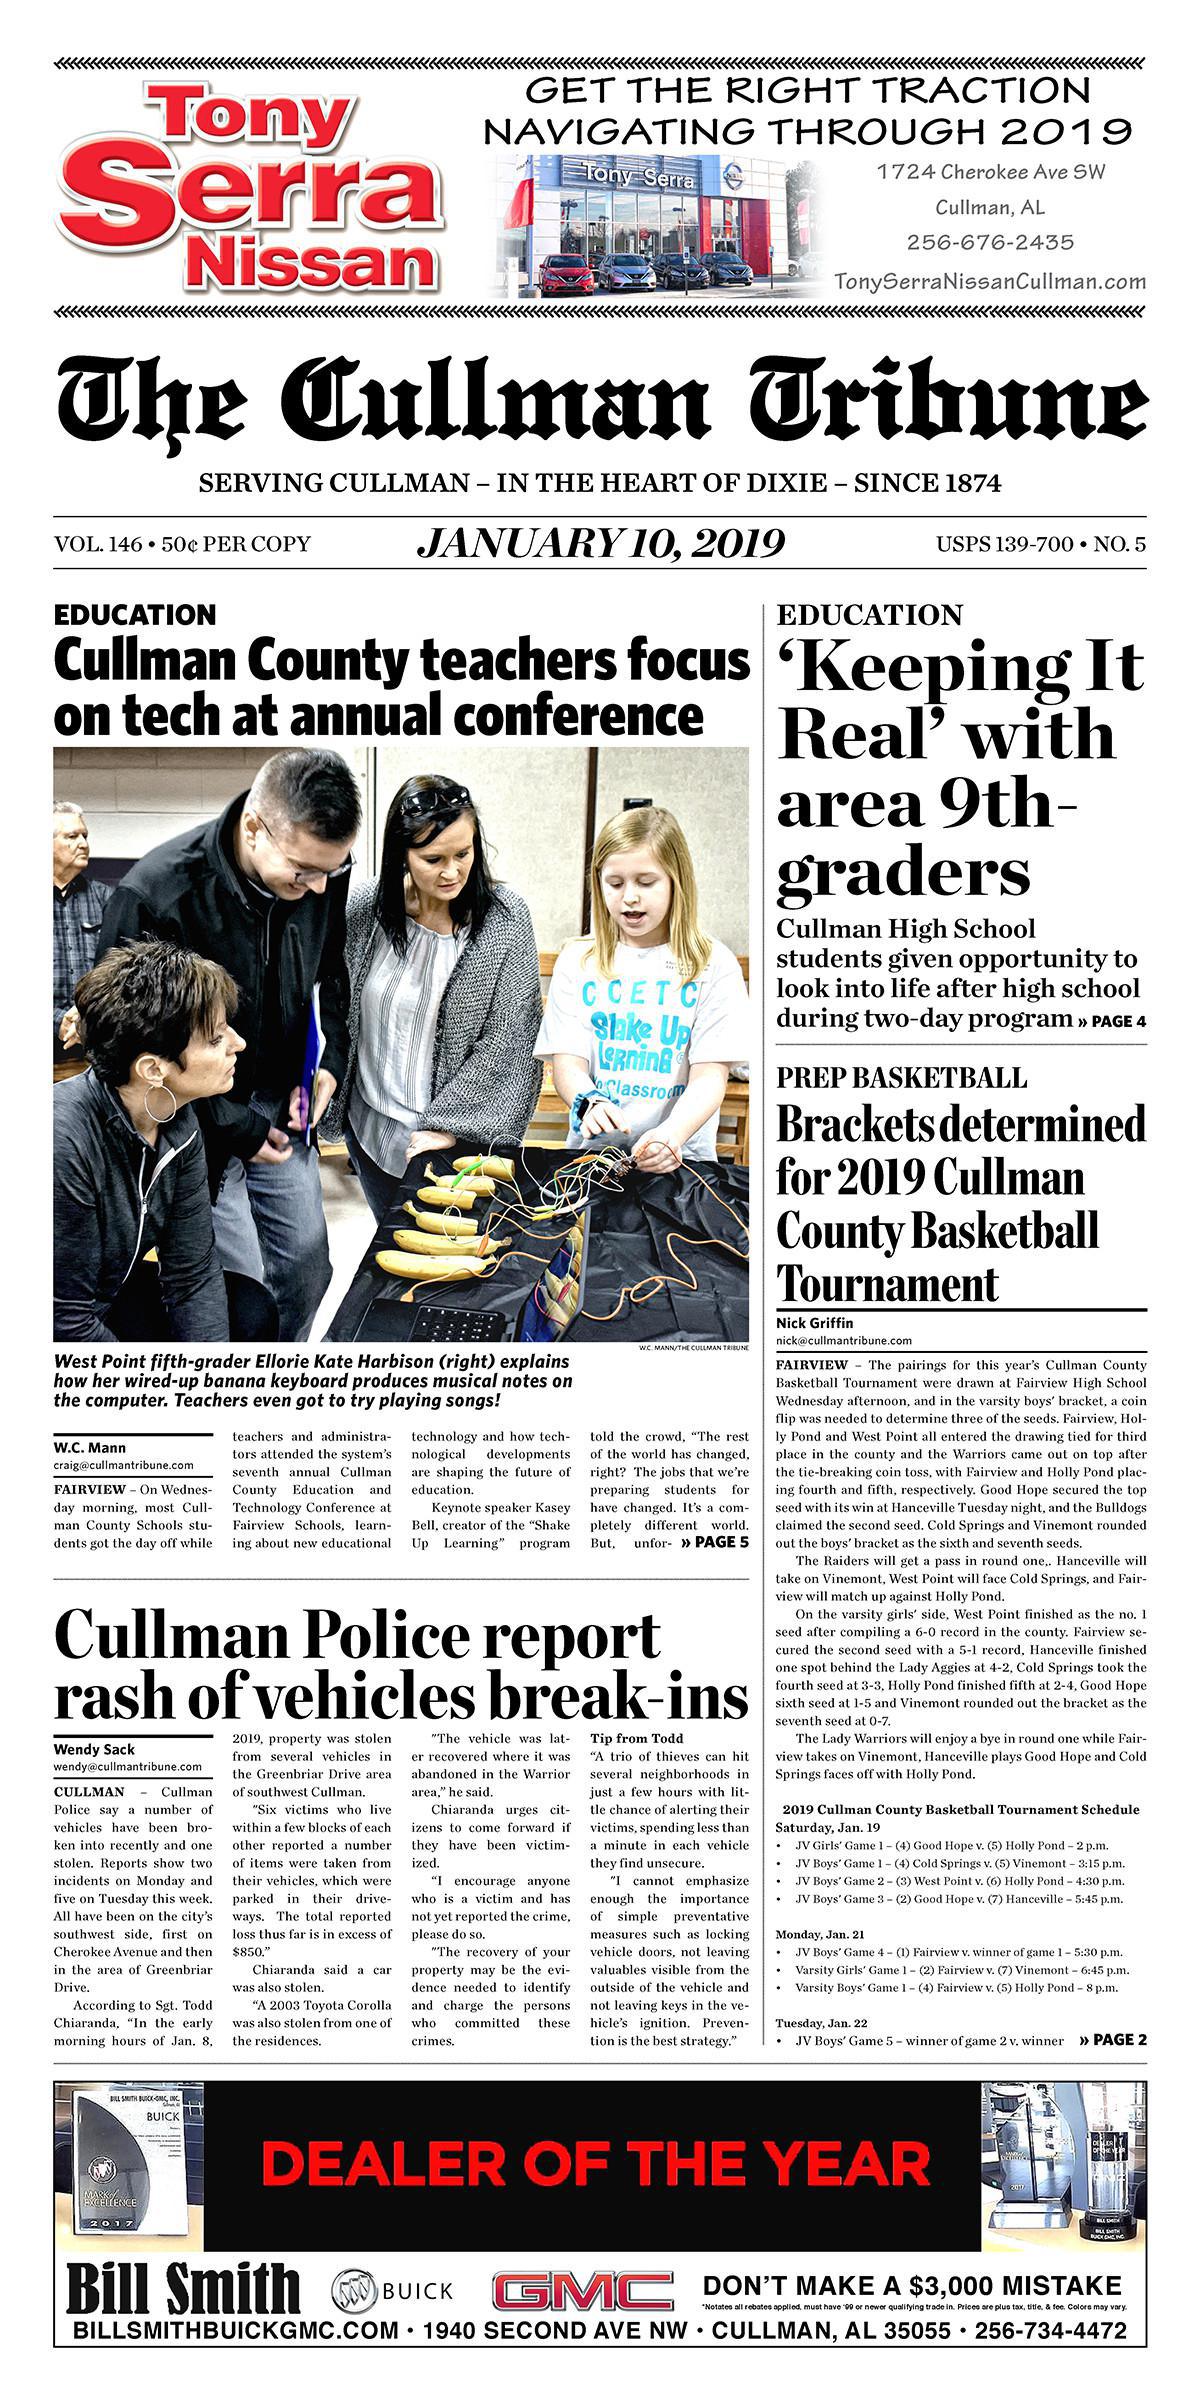 Good Morning Cullman! The 01-10-2019 edition of the Cullman Tribune is now ready to view